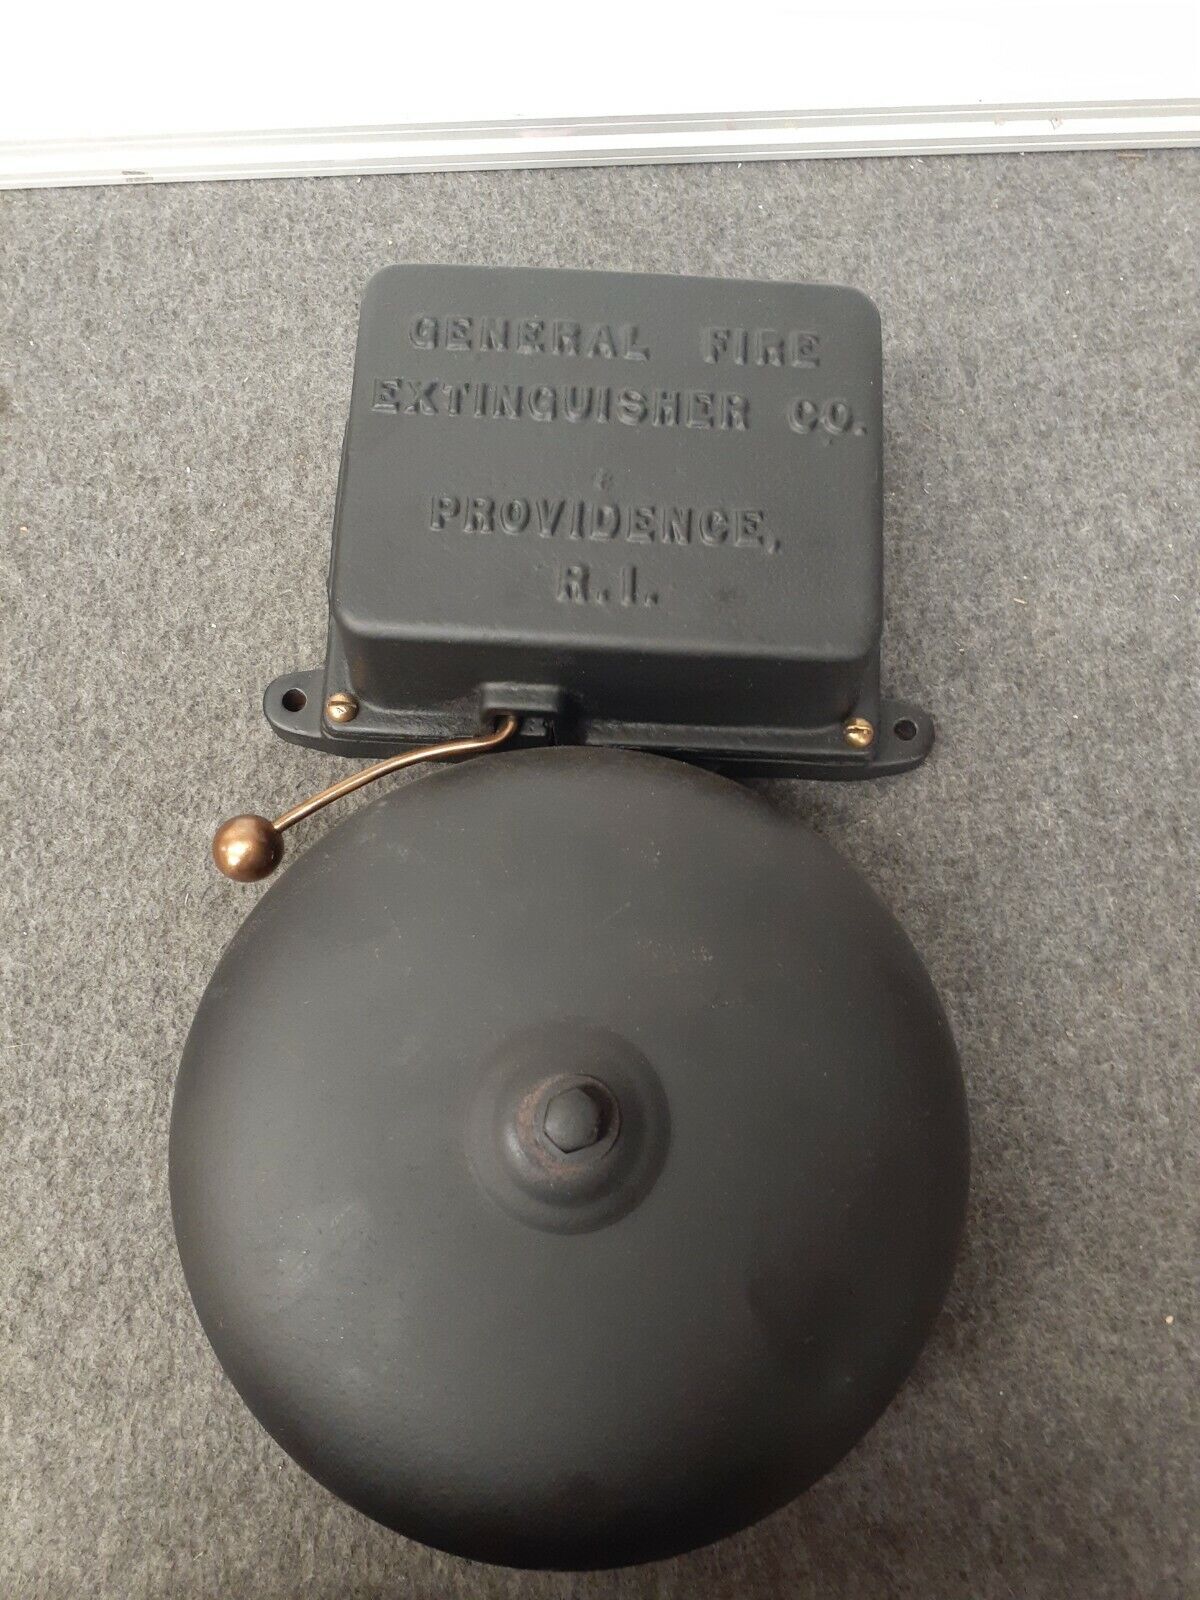 Vintage RARE GENERAL FIRE EXTINGUISHER CO.  ALARM Bell Providence RI